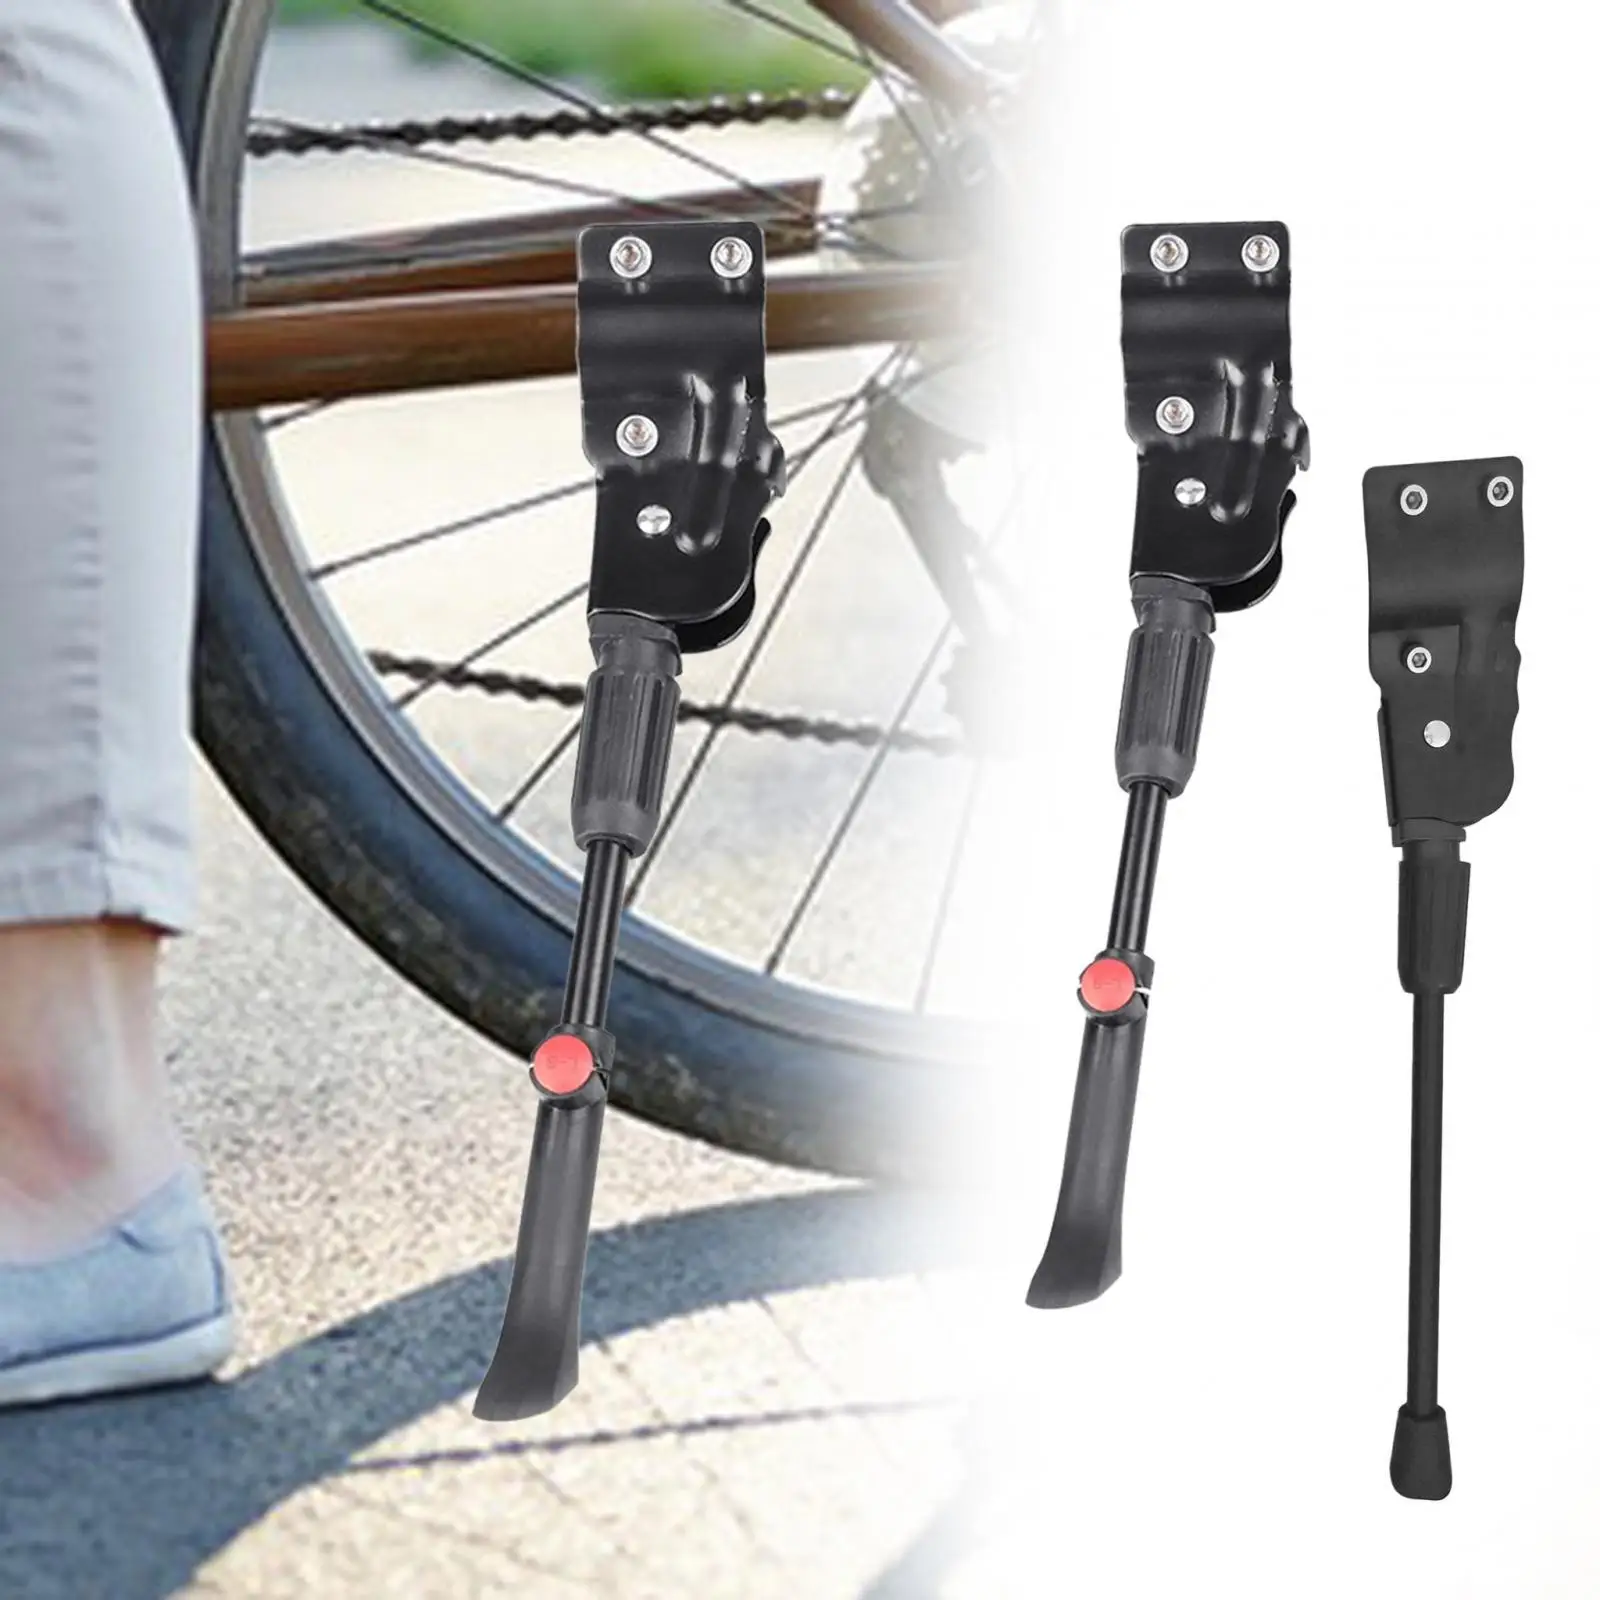 Bicycle Kick Stand Adjustable Height Cycling Accessories Bike Kickstand Rear for BMX Outdoor Riding Adults Bike Road Bike